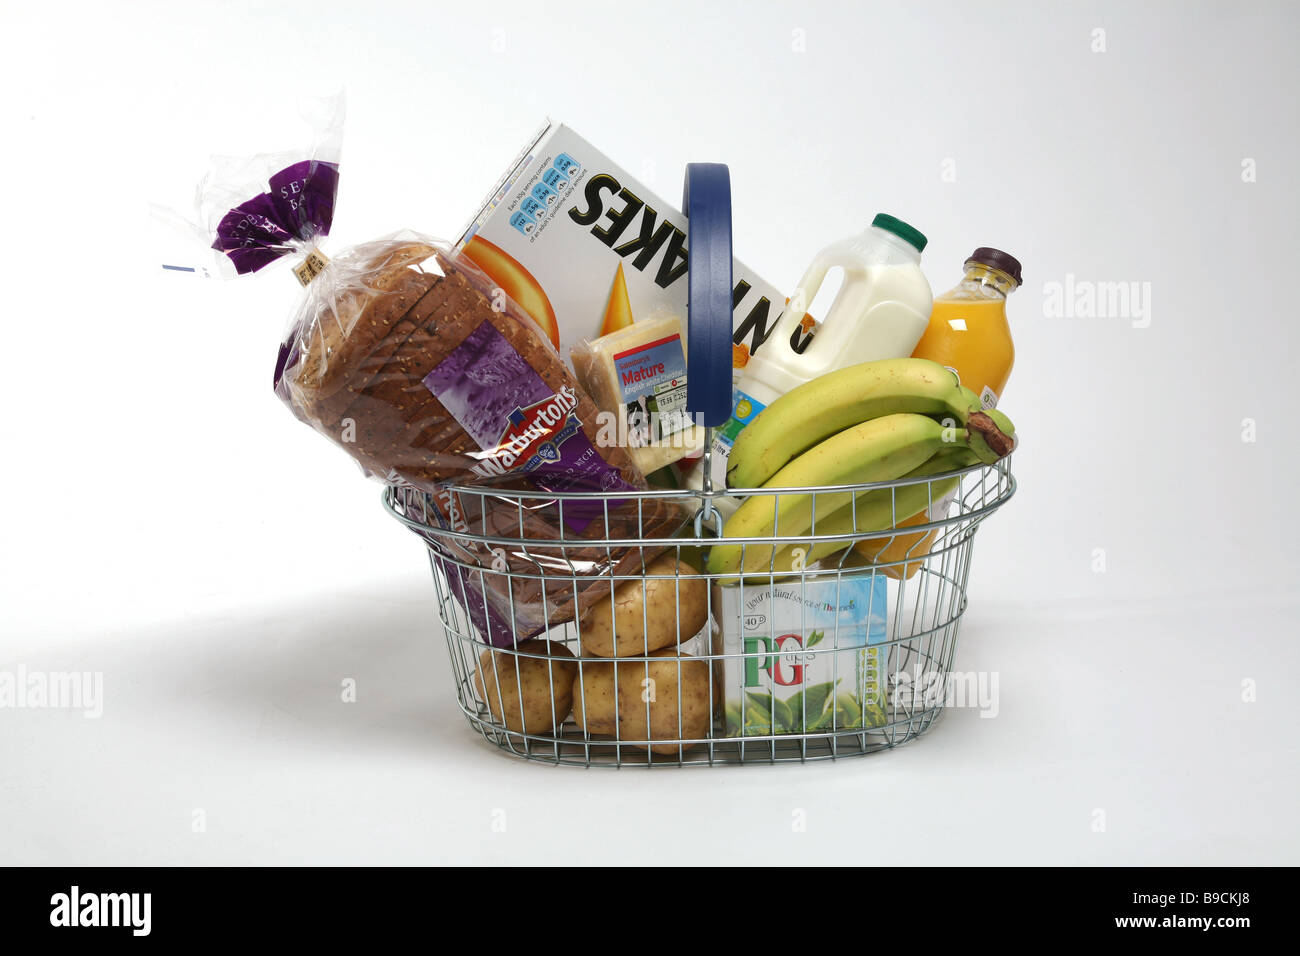 A shopping basket filled with groceries Stock Photo